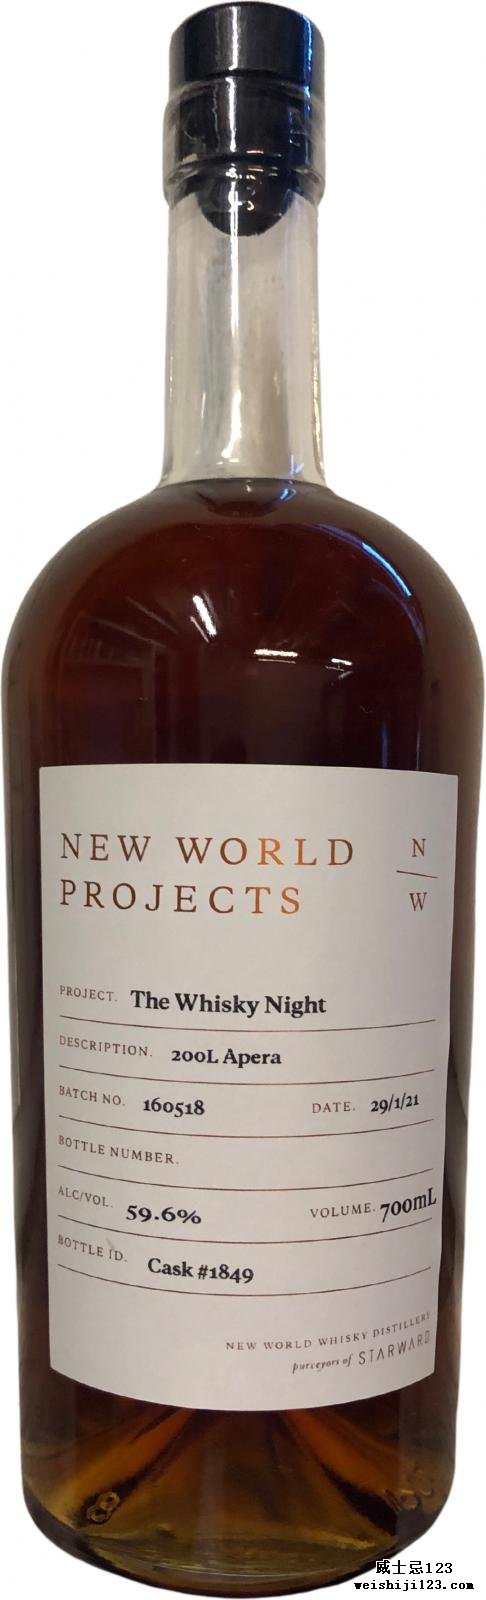 New World Projects The Whisky Night Apera